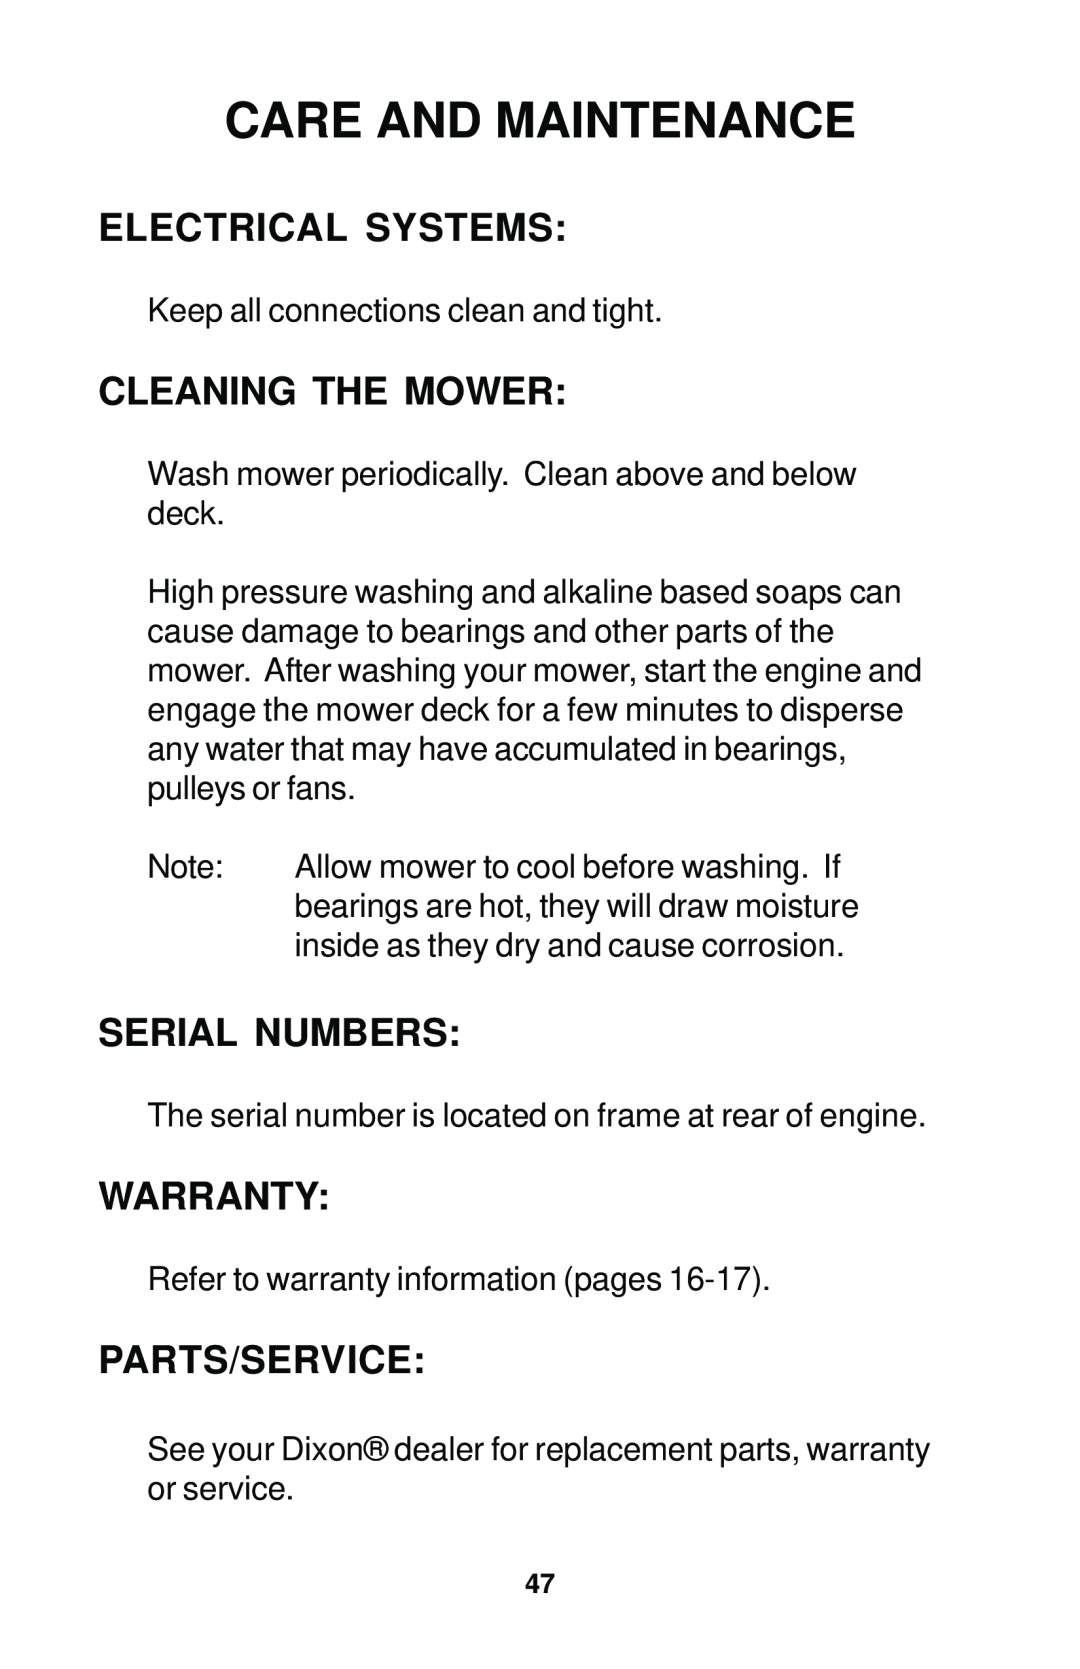 Dixon 17823-0704 Electrical Systems, Cleaning The Mower, Serial Numbers, Warranty, Parts/Service, Care And Maintenance 